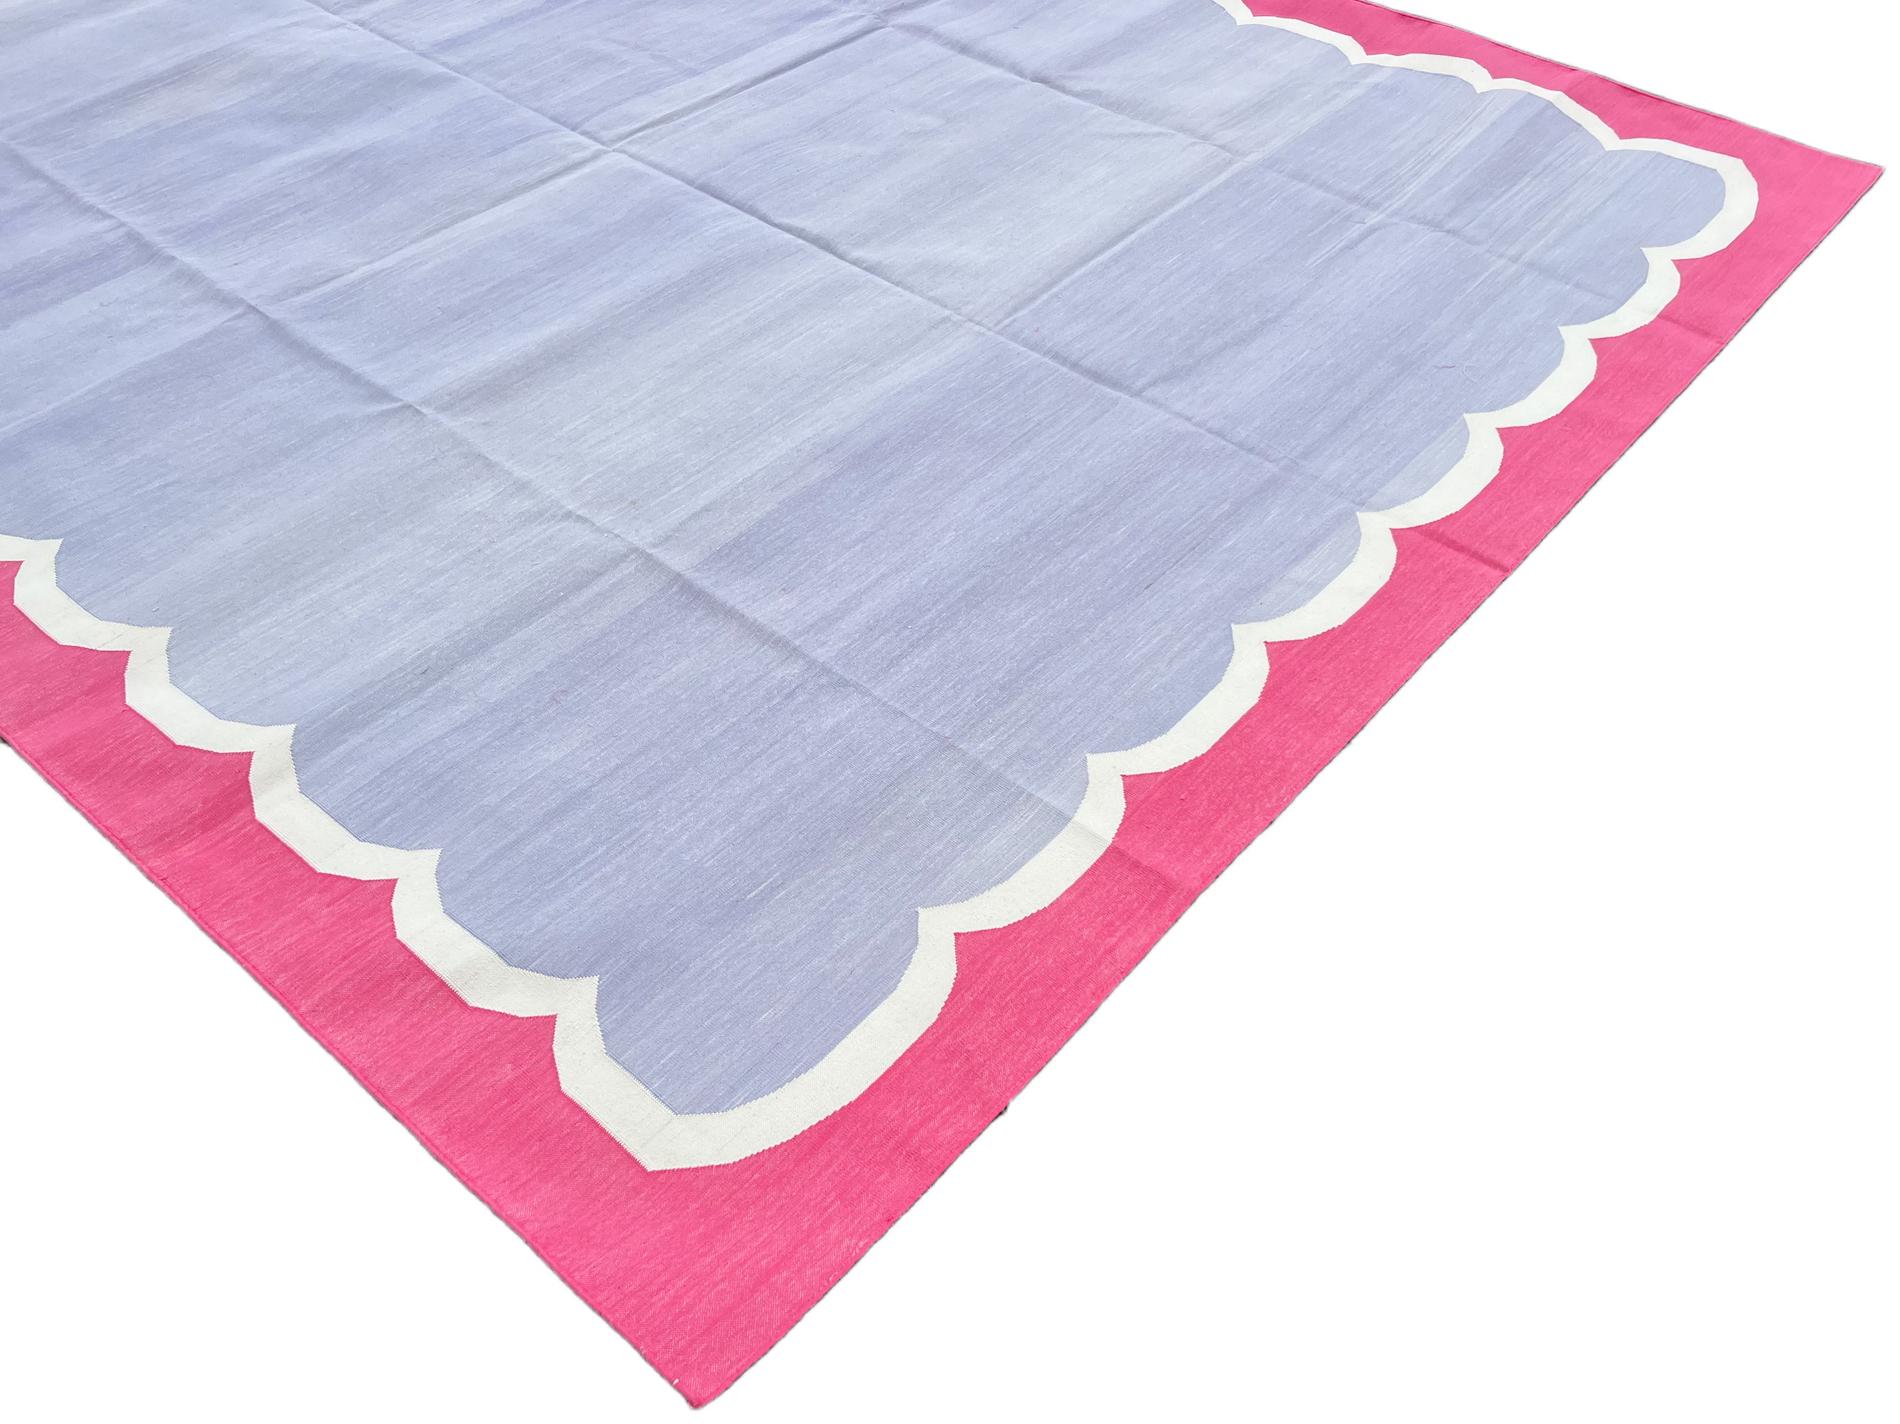 Hand-Woven Handmade Cotton Area Flat Weave Rug, 8x10 Lavender, Pink Scallop Indian Dhurrie For Sale